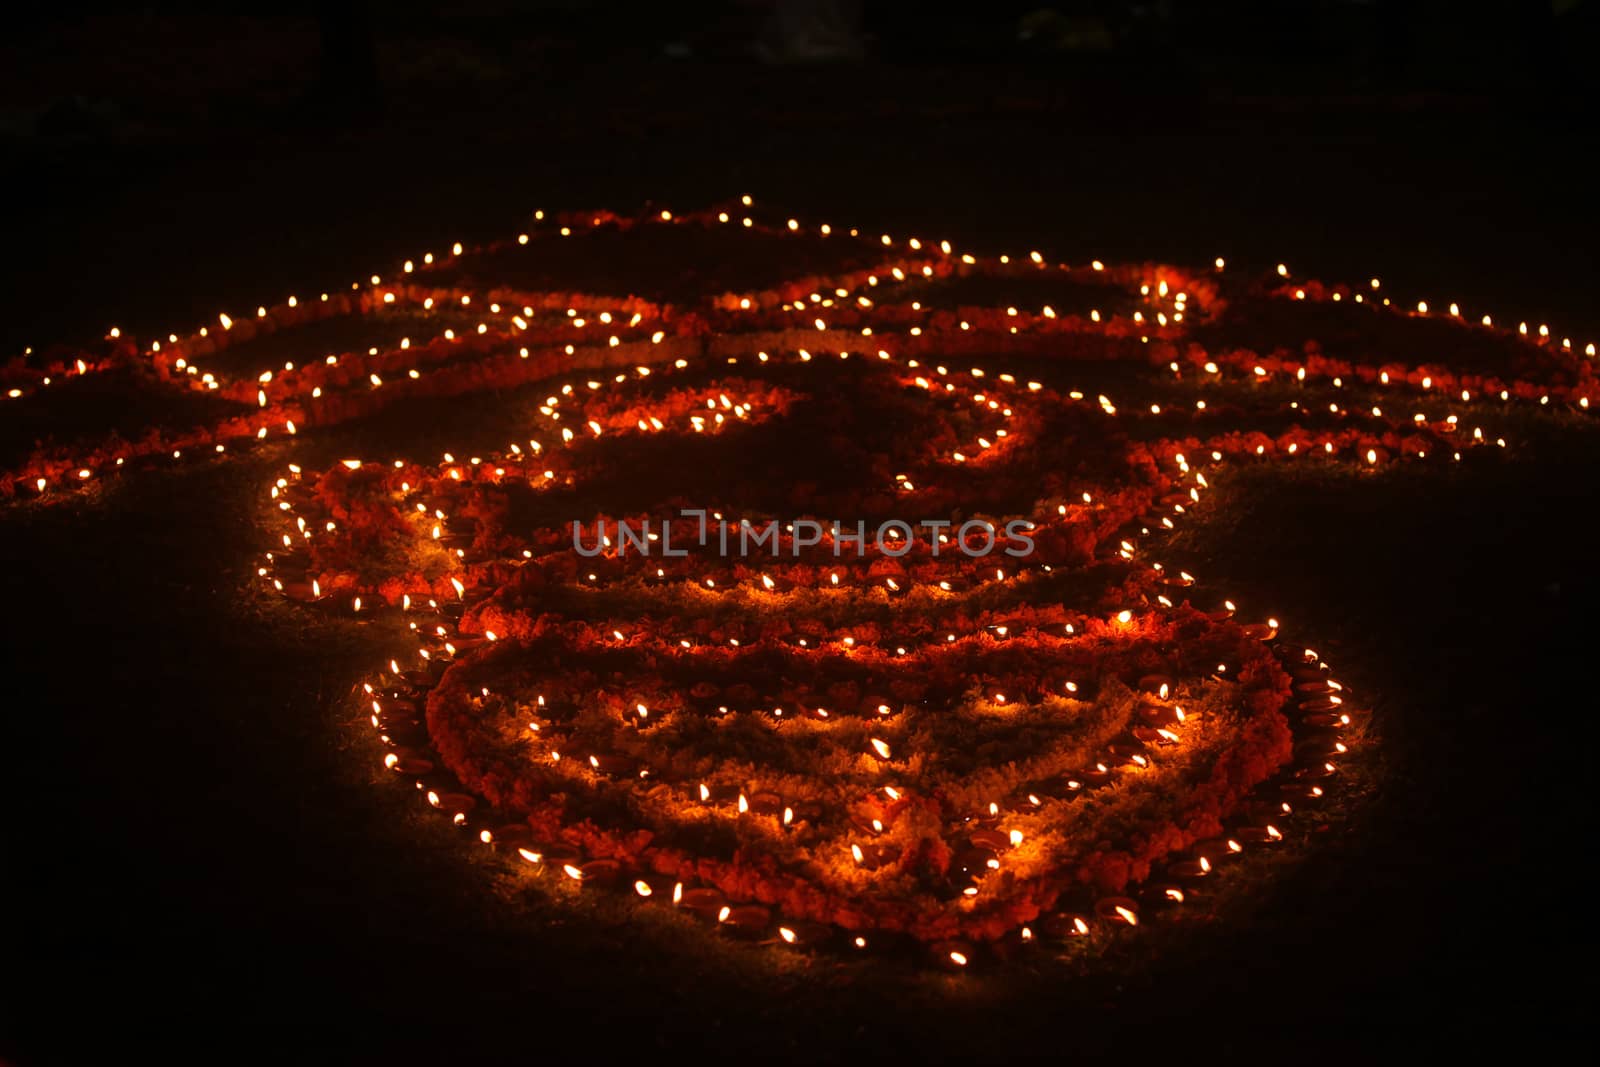 Traditional earthen lamps beautifully setup in a design on a lawn at night, during Diwali festival in India.